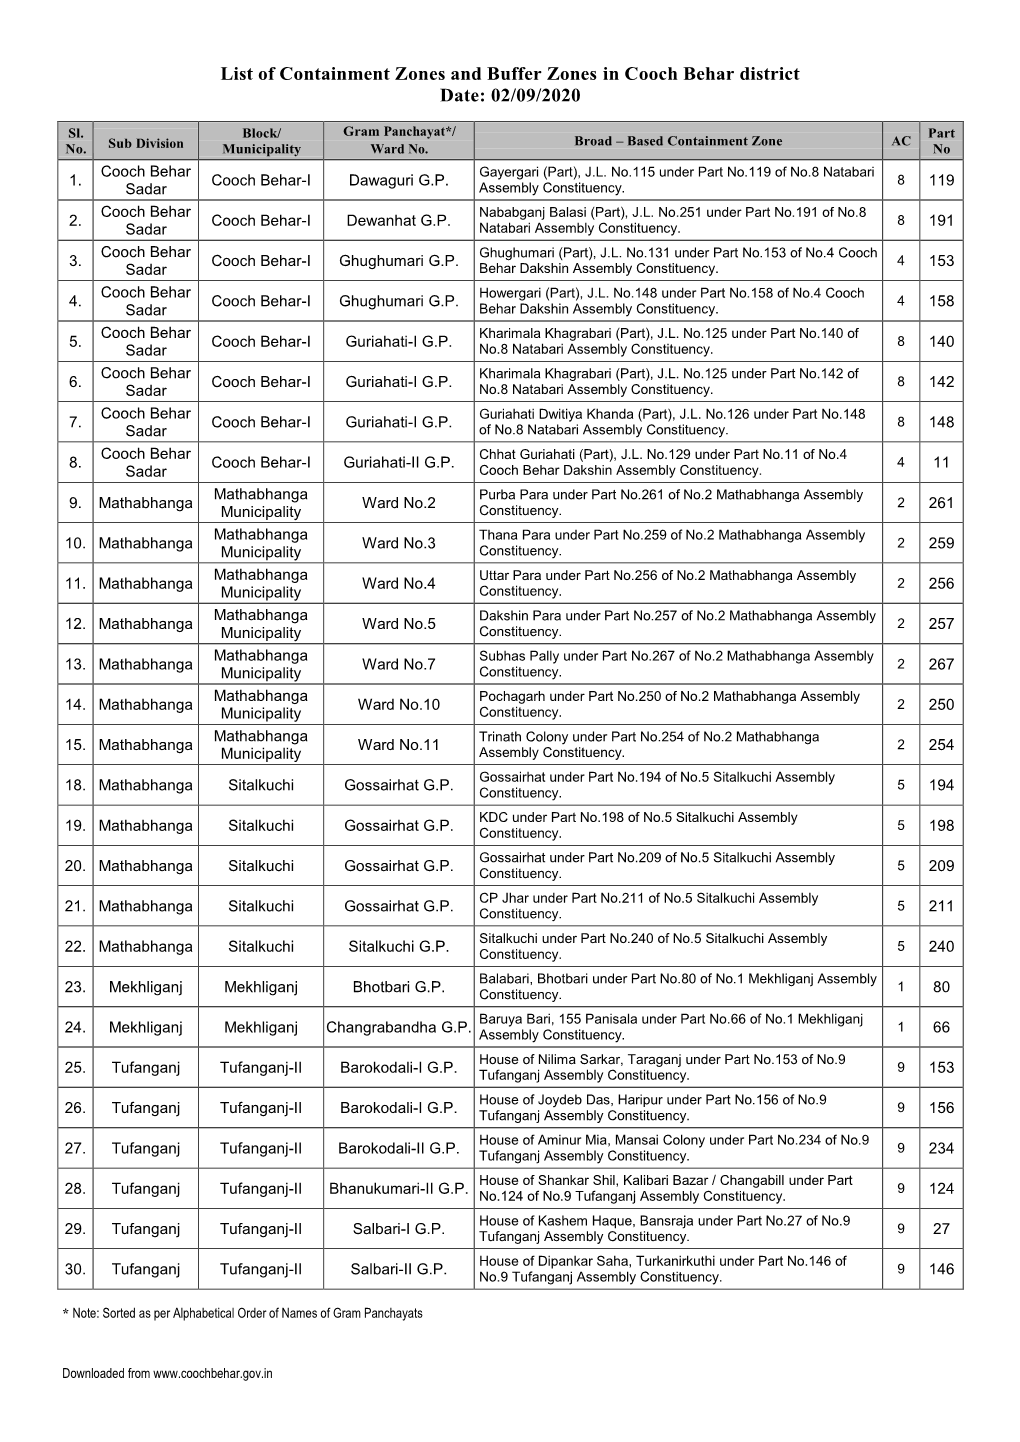 List of Containment Zones and Buffer Zones in Cooch Behar District Date: 02/09/2020